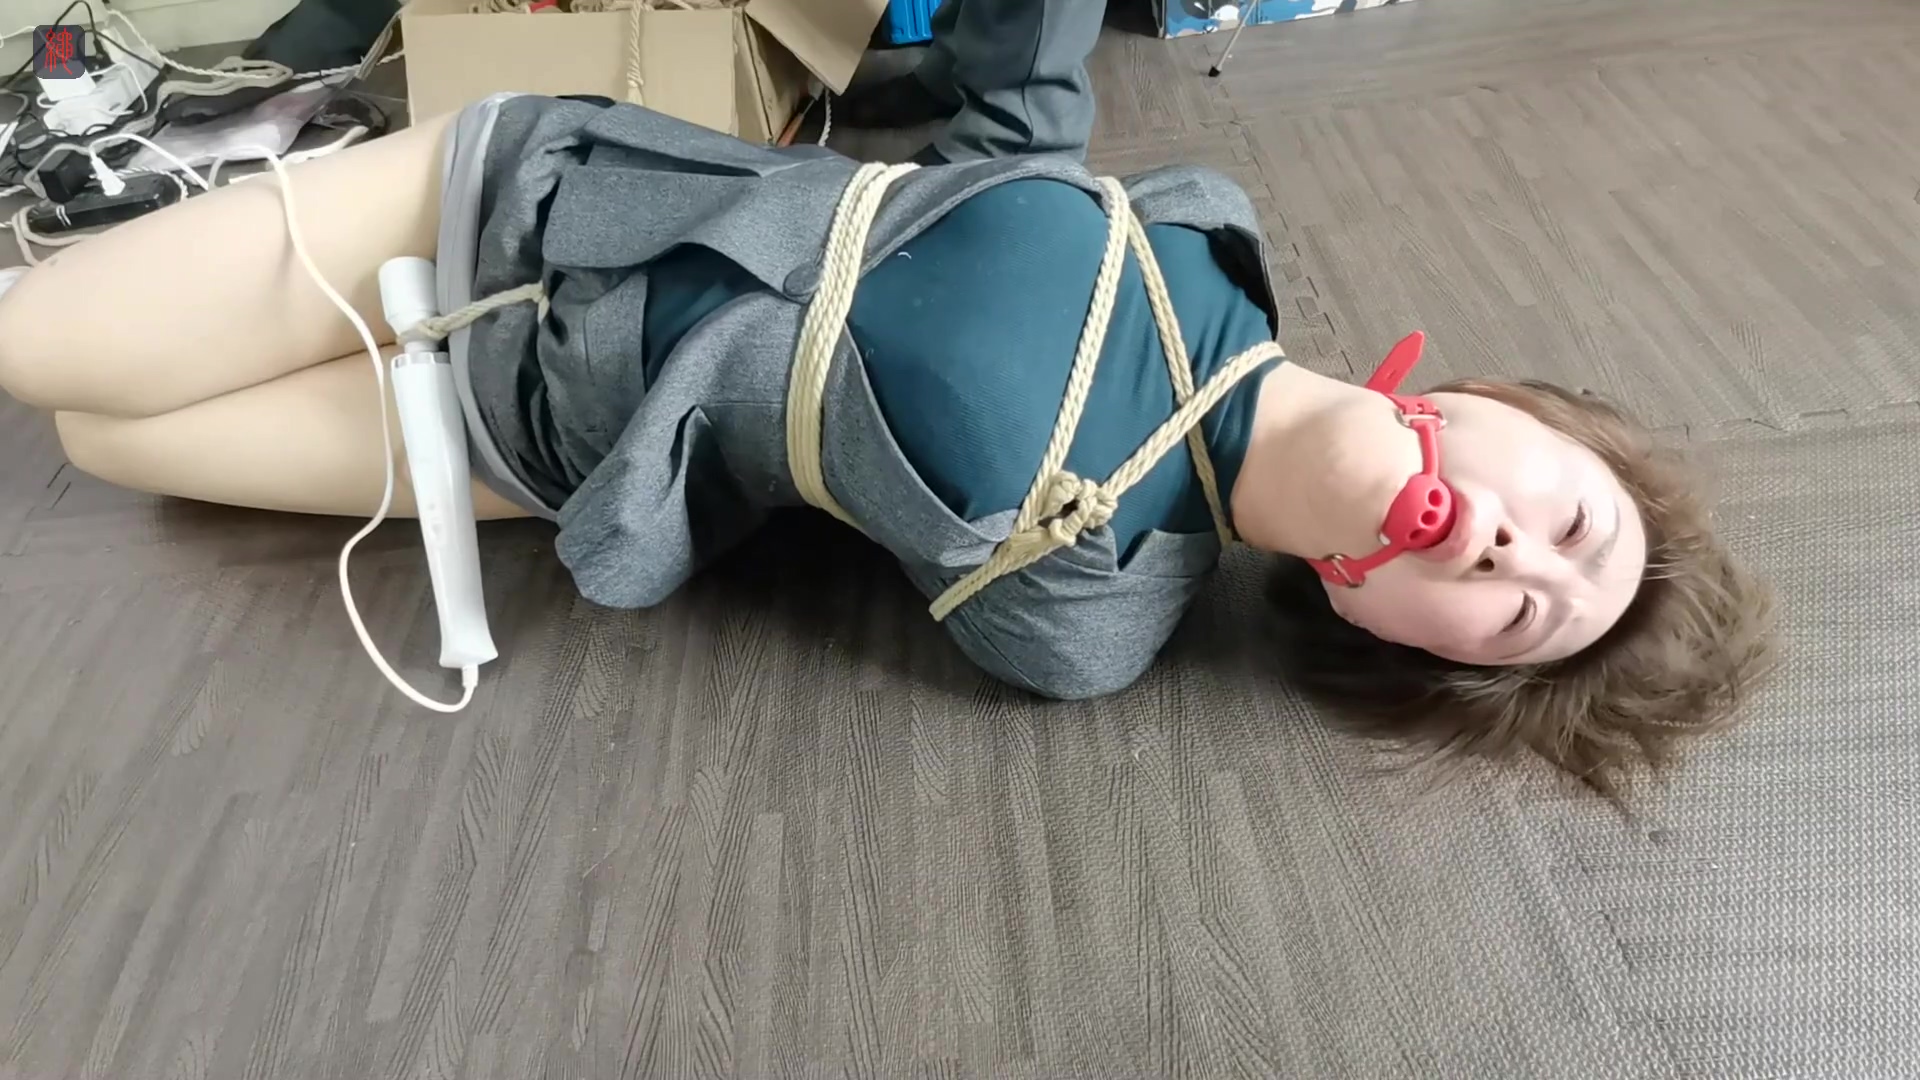 Asian Business Woman Hogtied And Strung Up 1